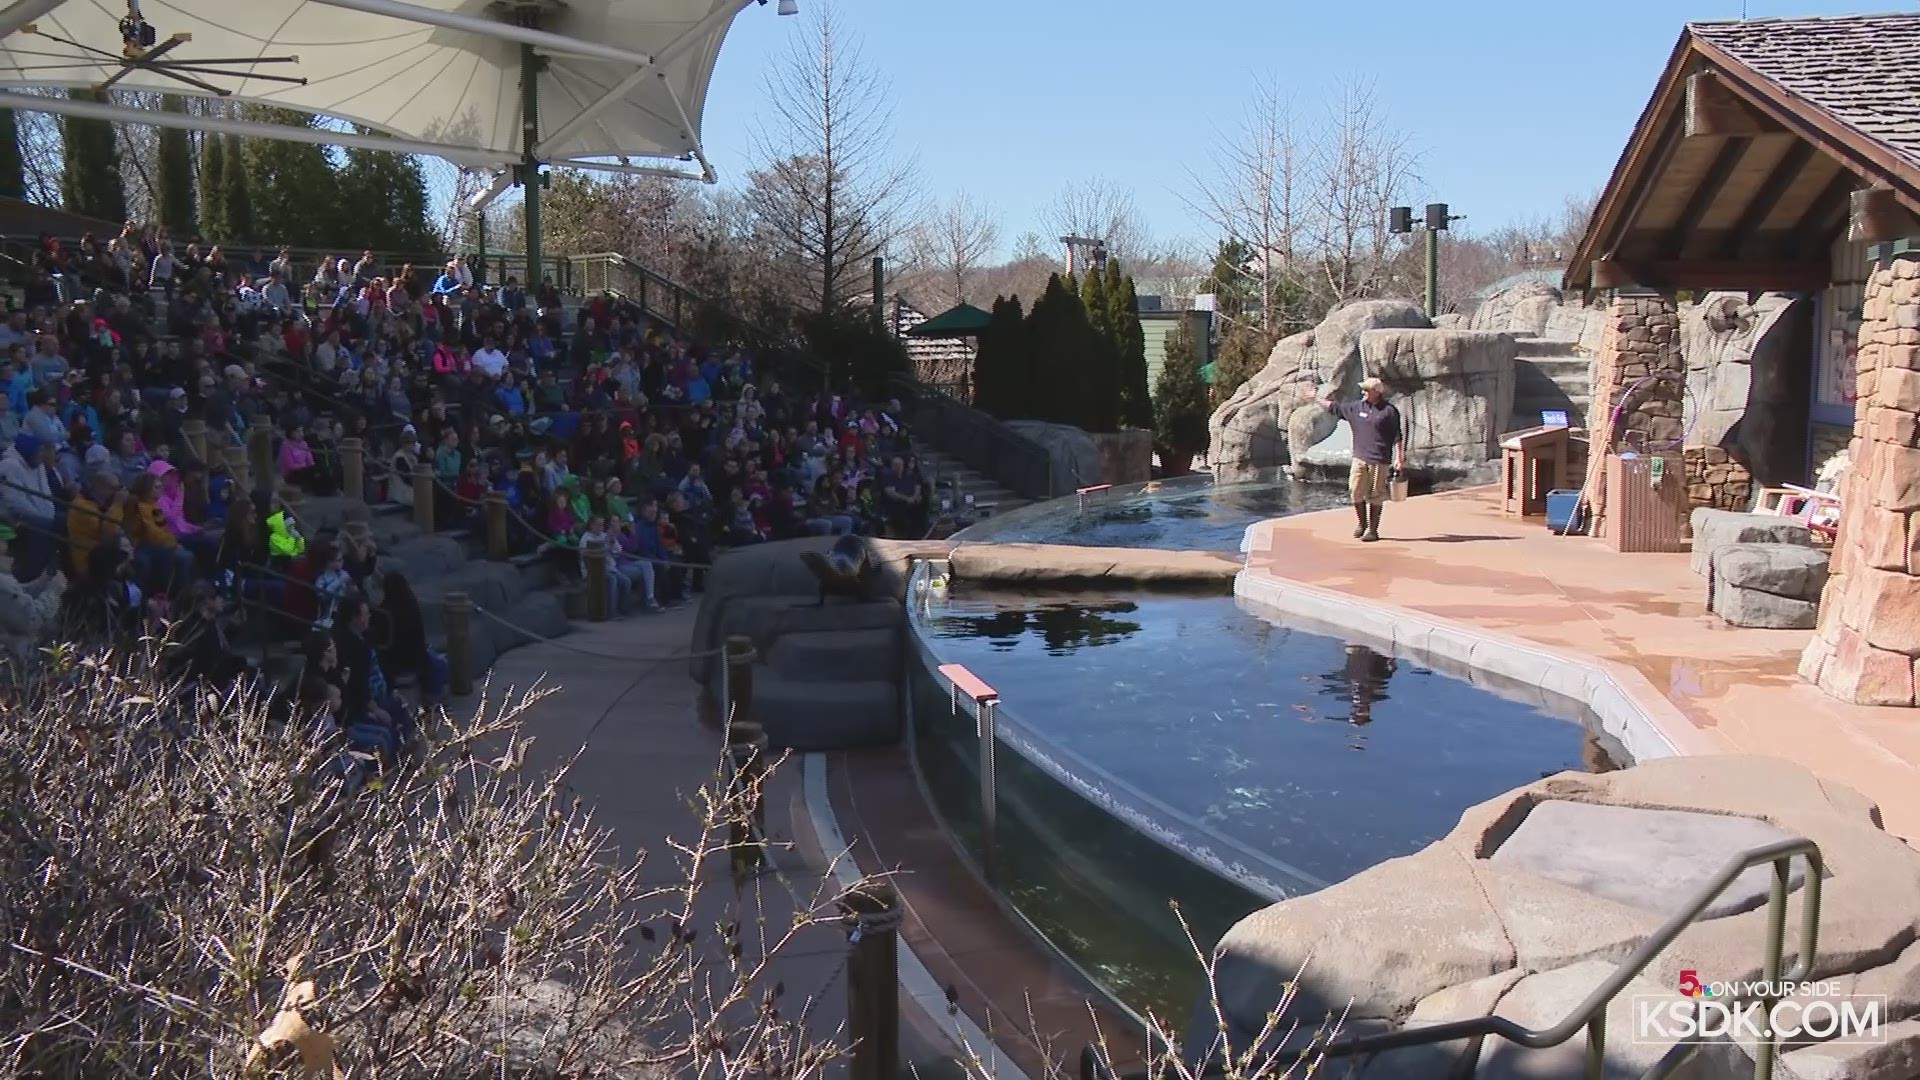 The sea lions perform several tricks, including high jumps and flipper walks at the Saint Louis Zoo.